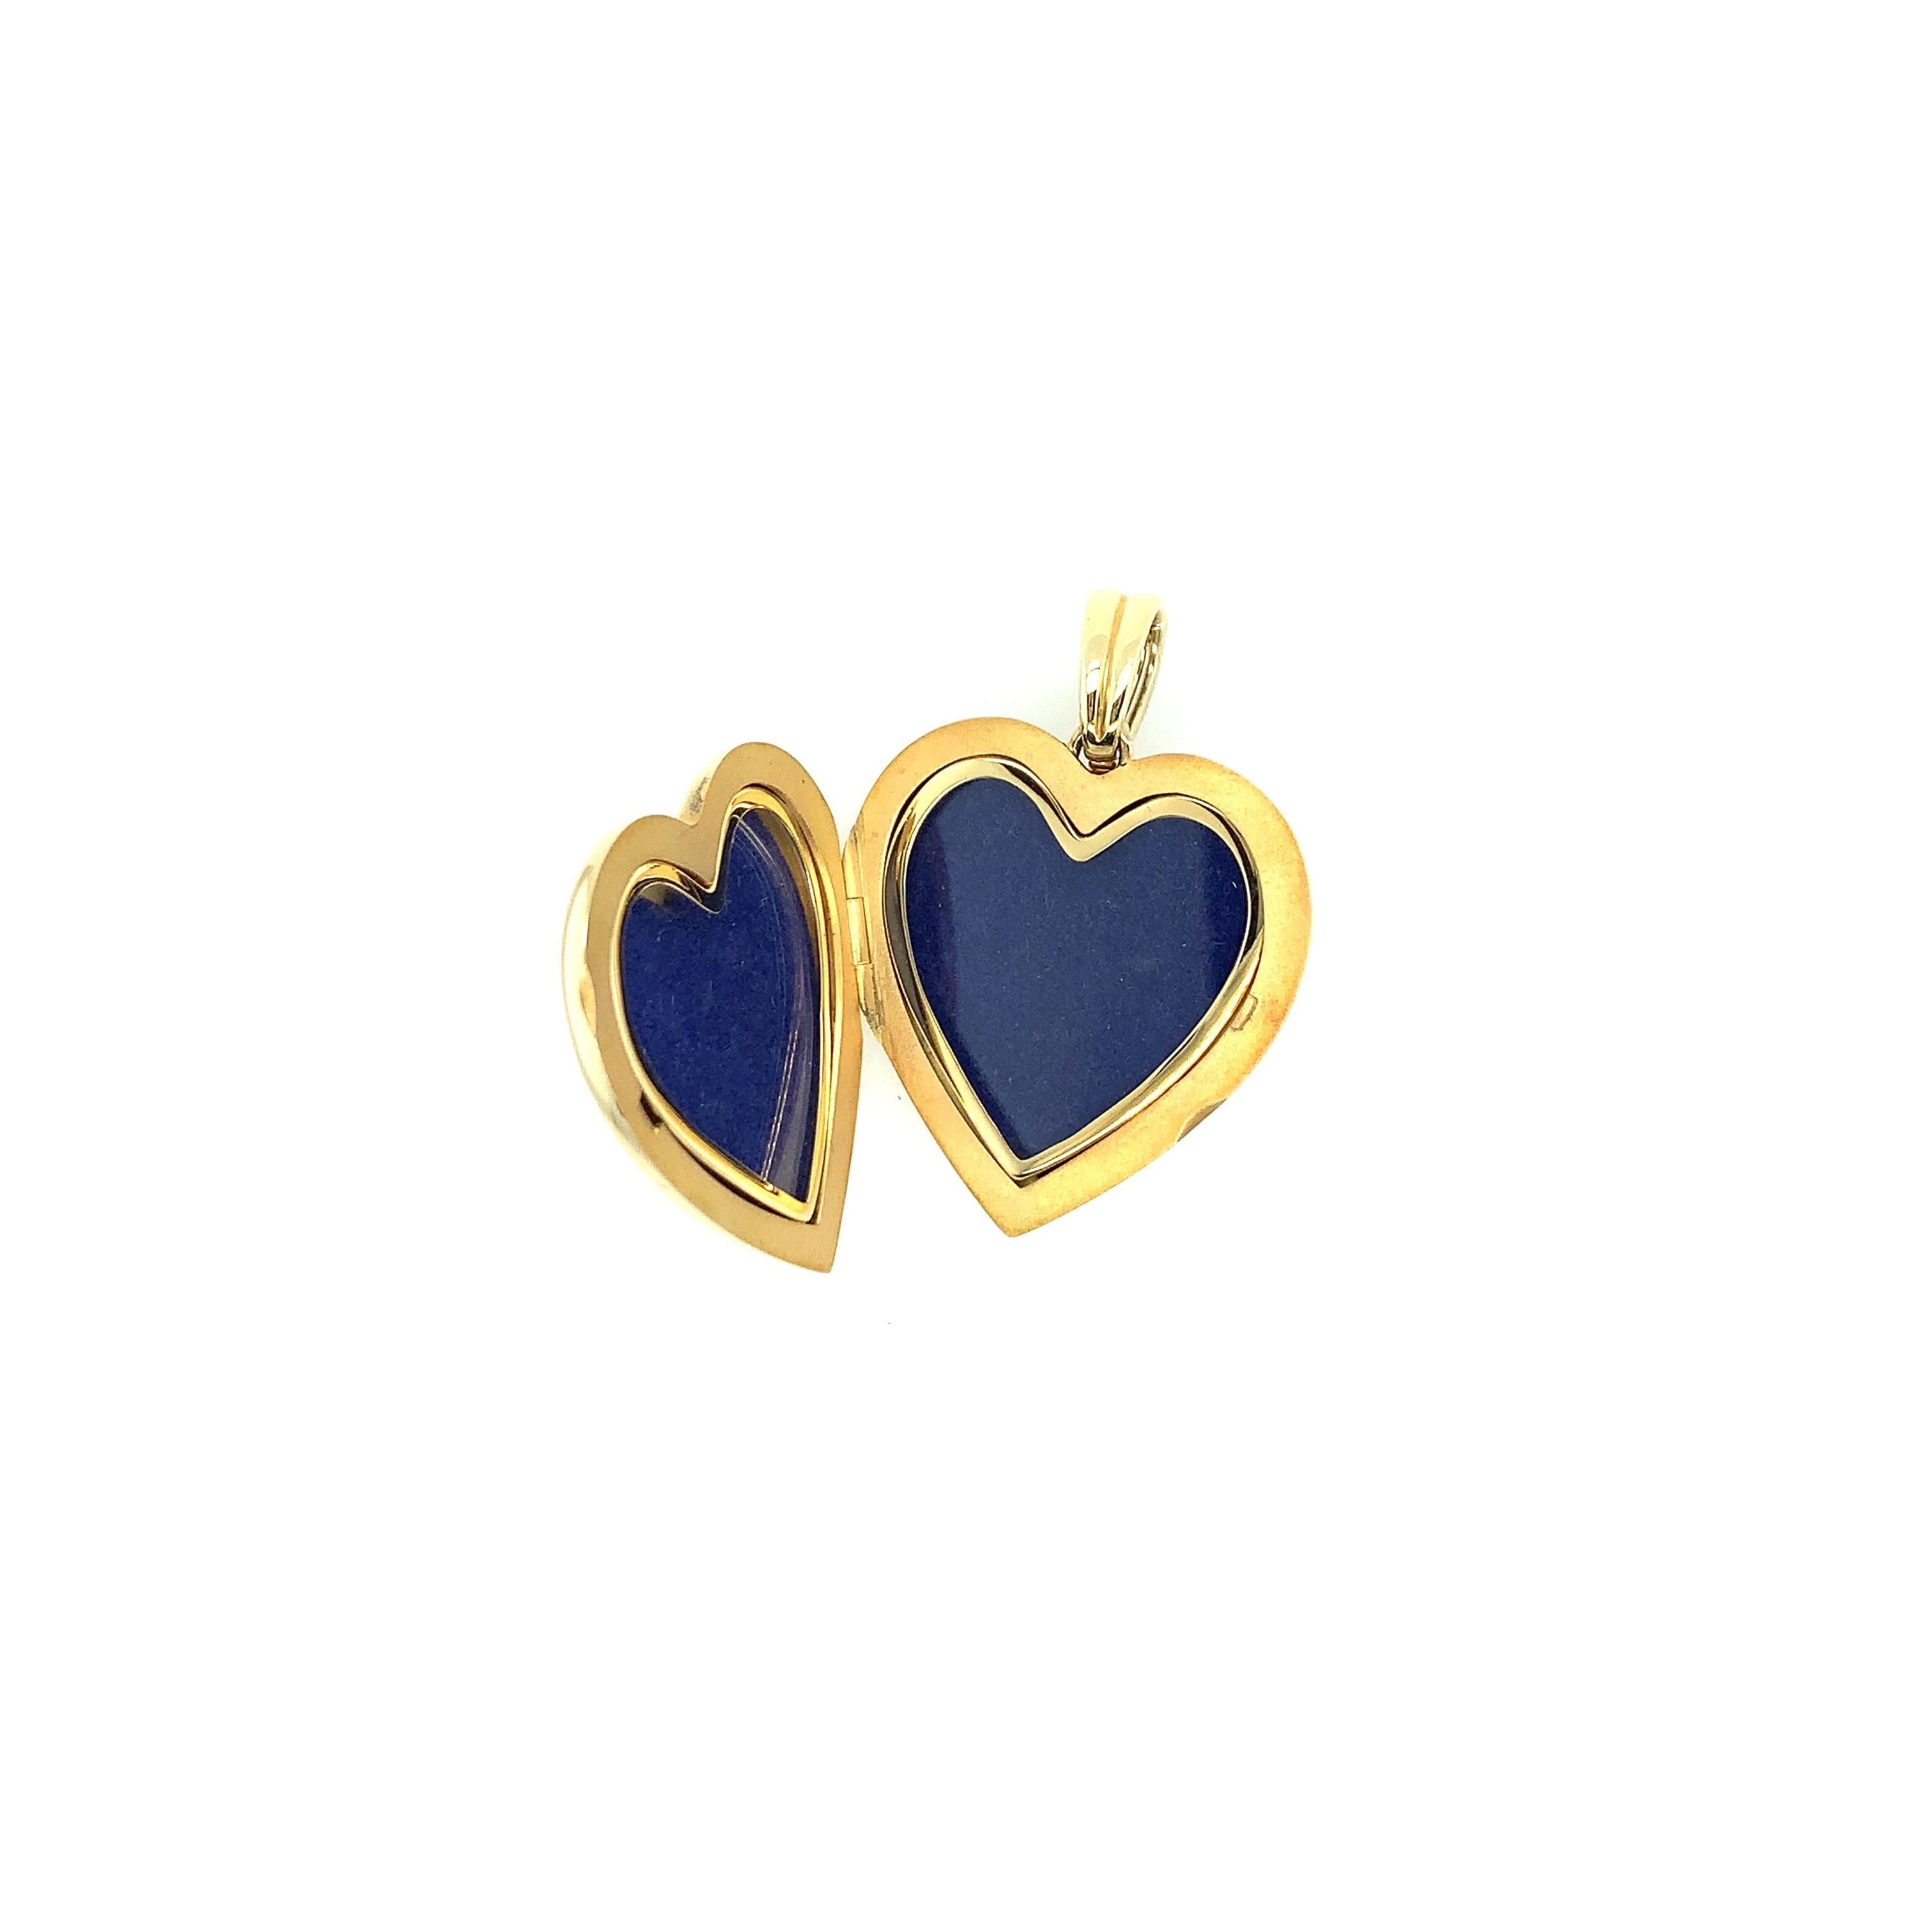 Women's Customizable Polished Heart Shaped Pendant Locket 18k Yellow Gold 37 mm x 34 mm For Sale